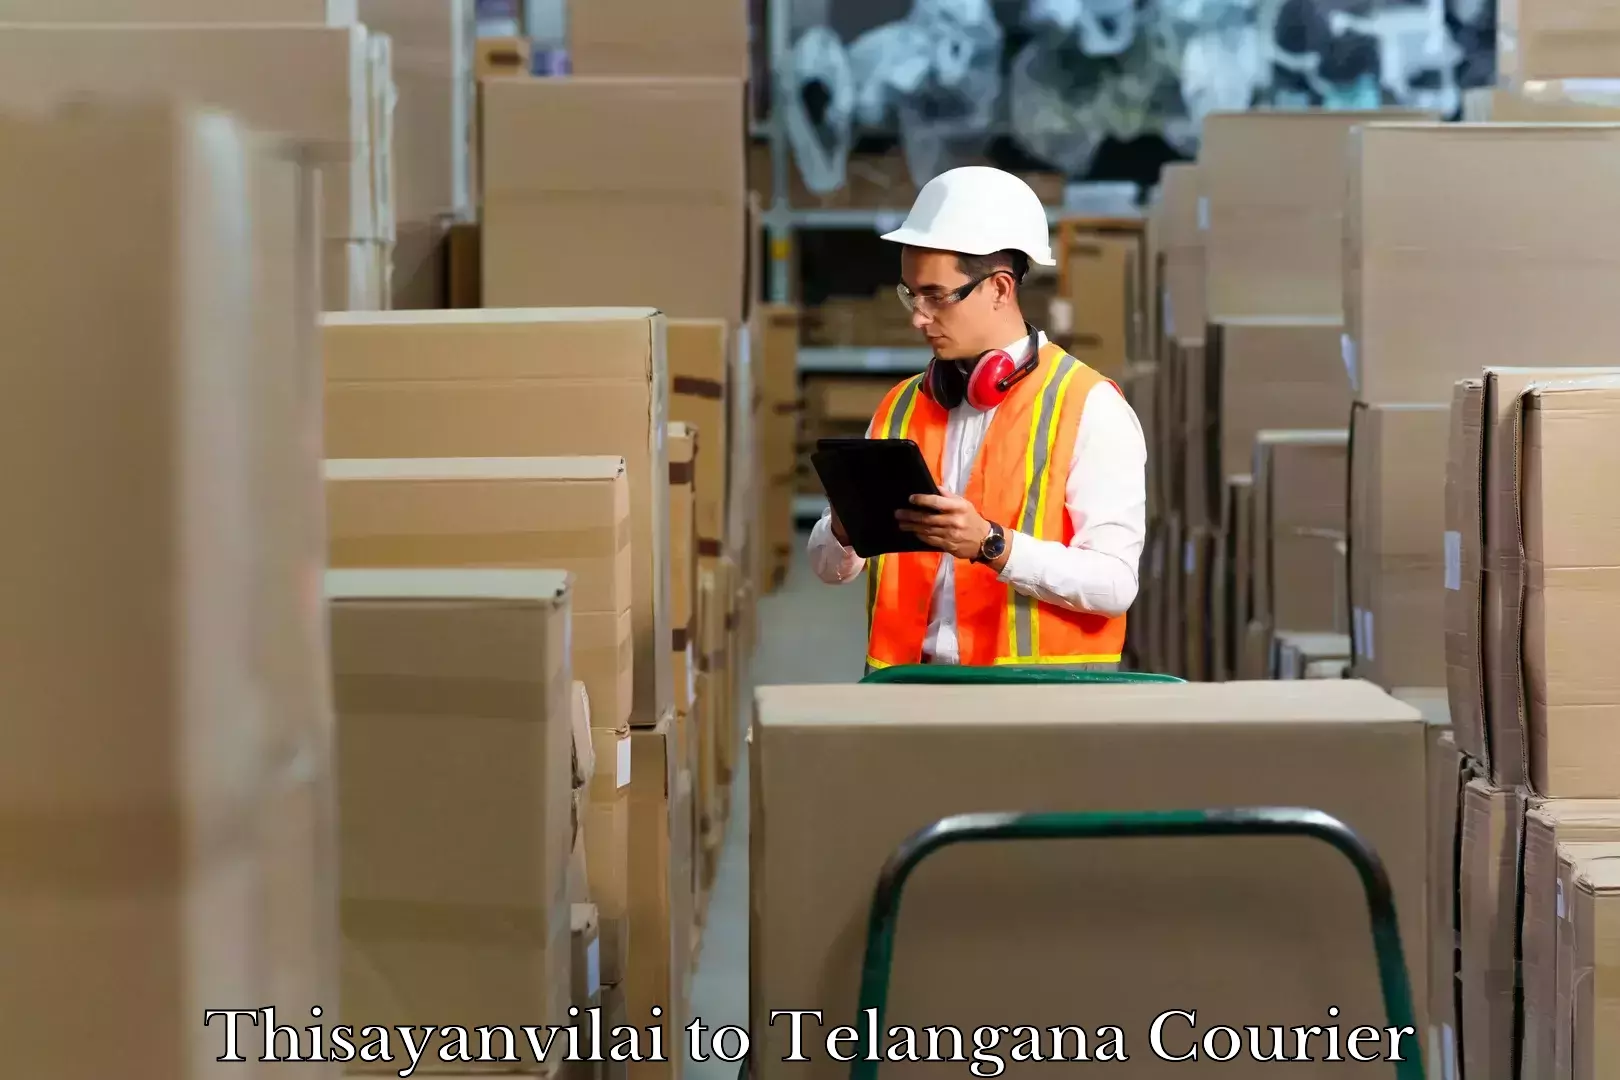 Luggage shipment specialists Thisayanvilai to Mancherial